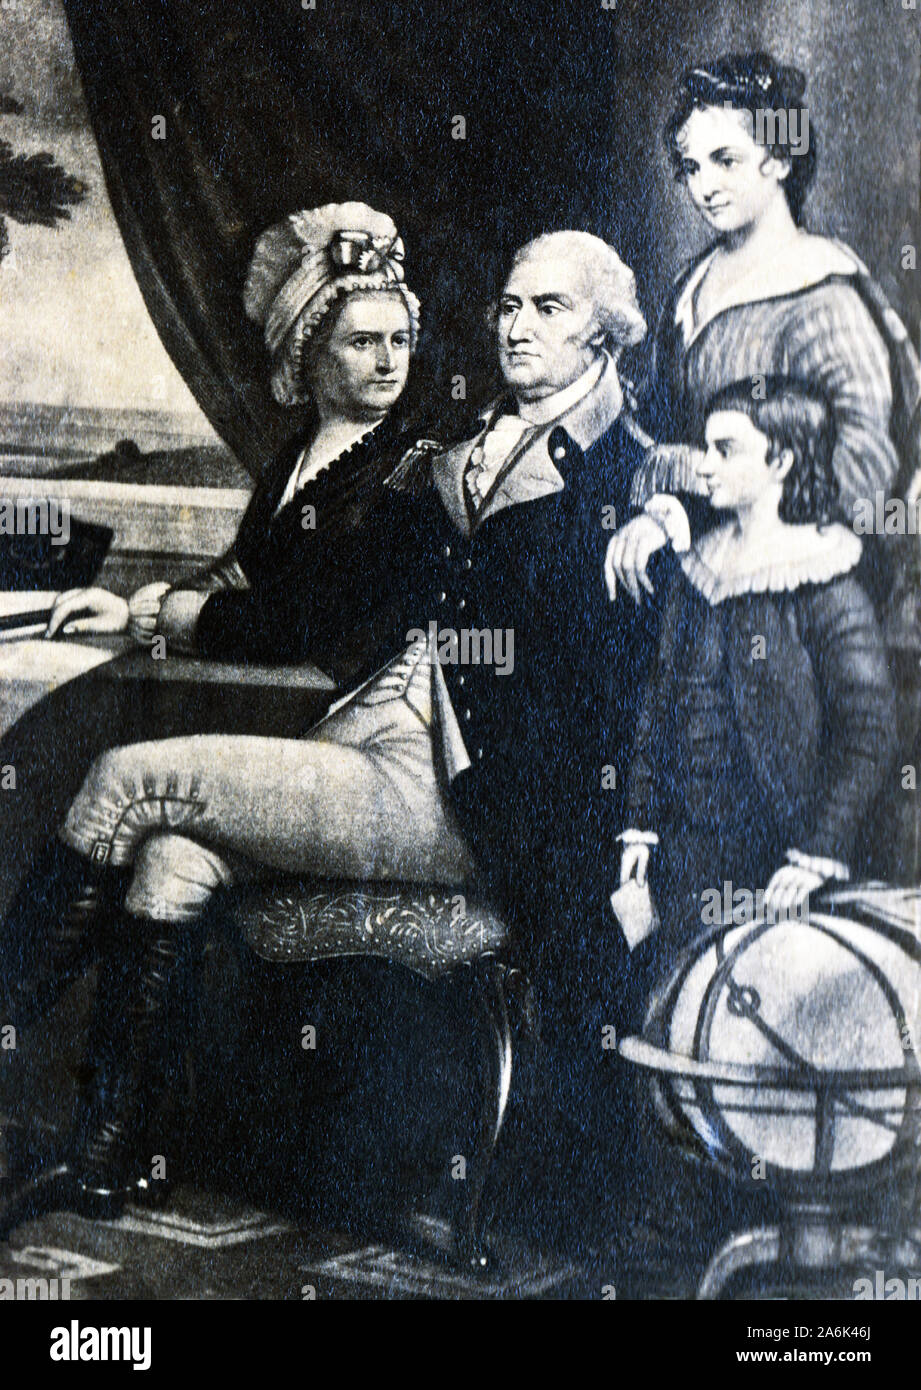 Vintage photograph of a painting of George Washington, with wife Martha and their children, circa 1780s. Stock Photo